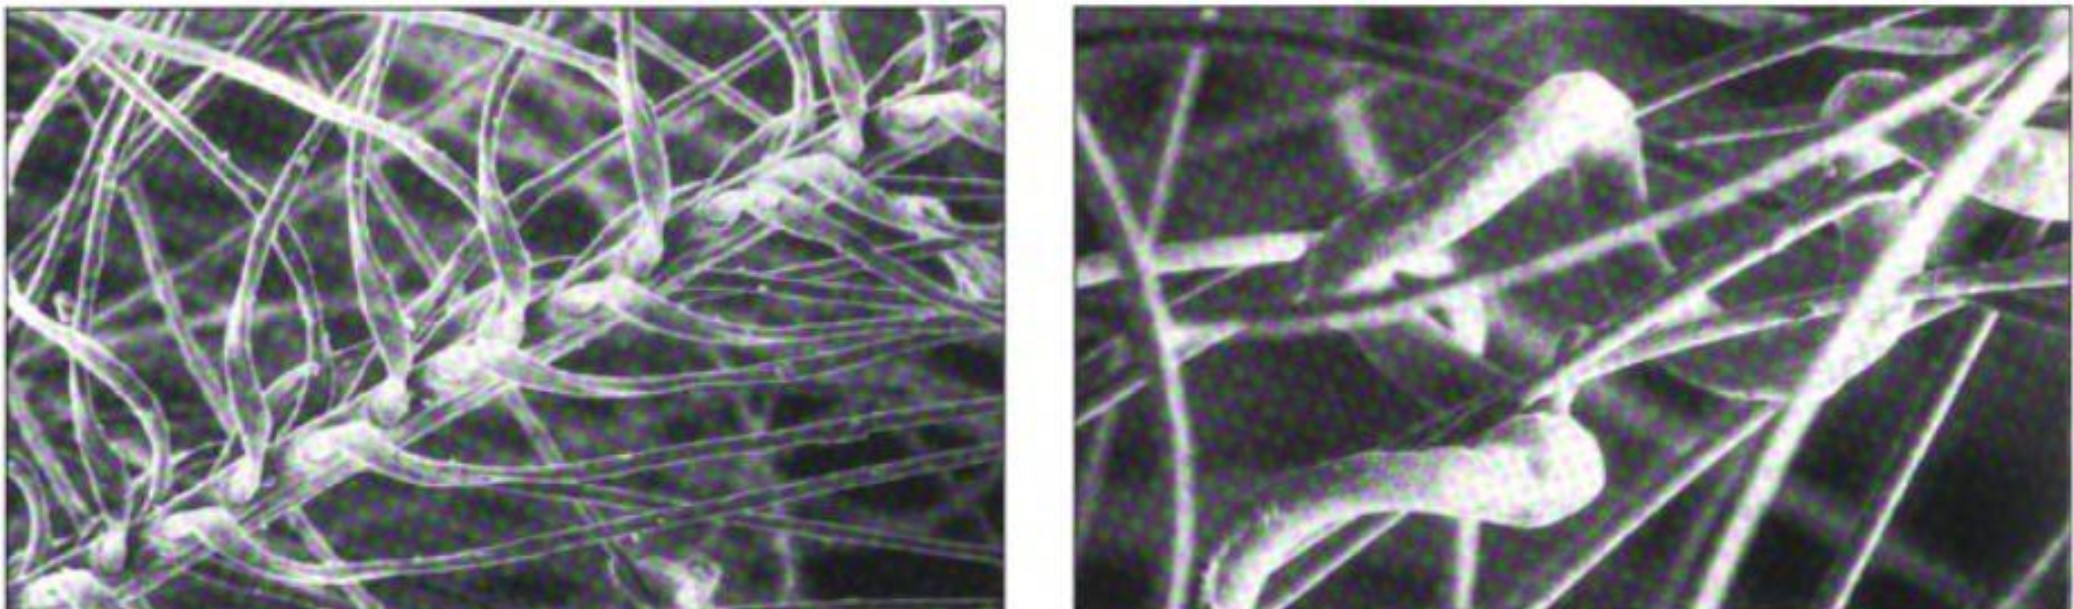 Scanning electron microscope images of down (left) and PrimaLoft (right).